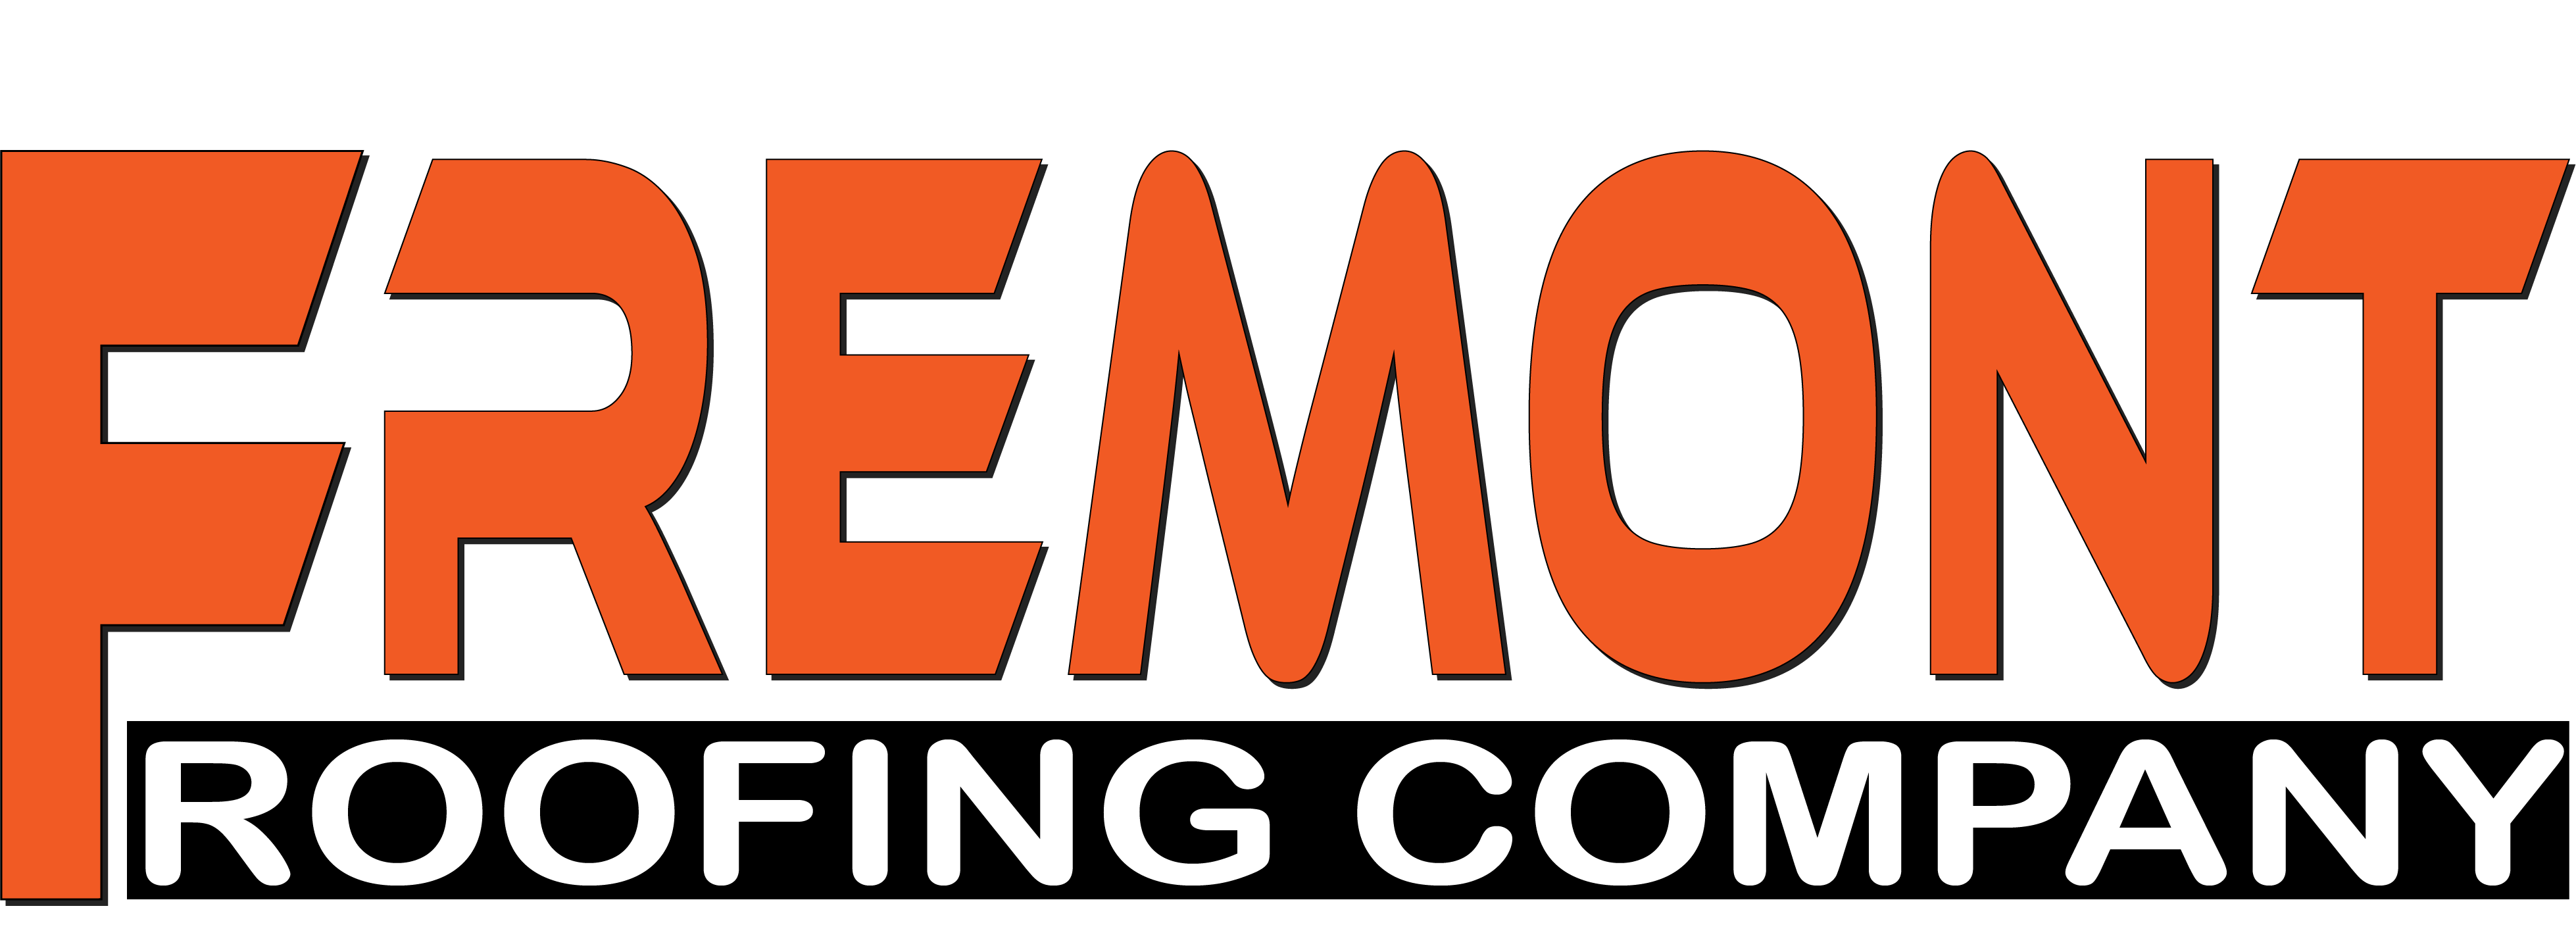 Fremont Roofing Company LOGO